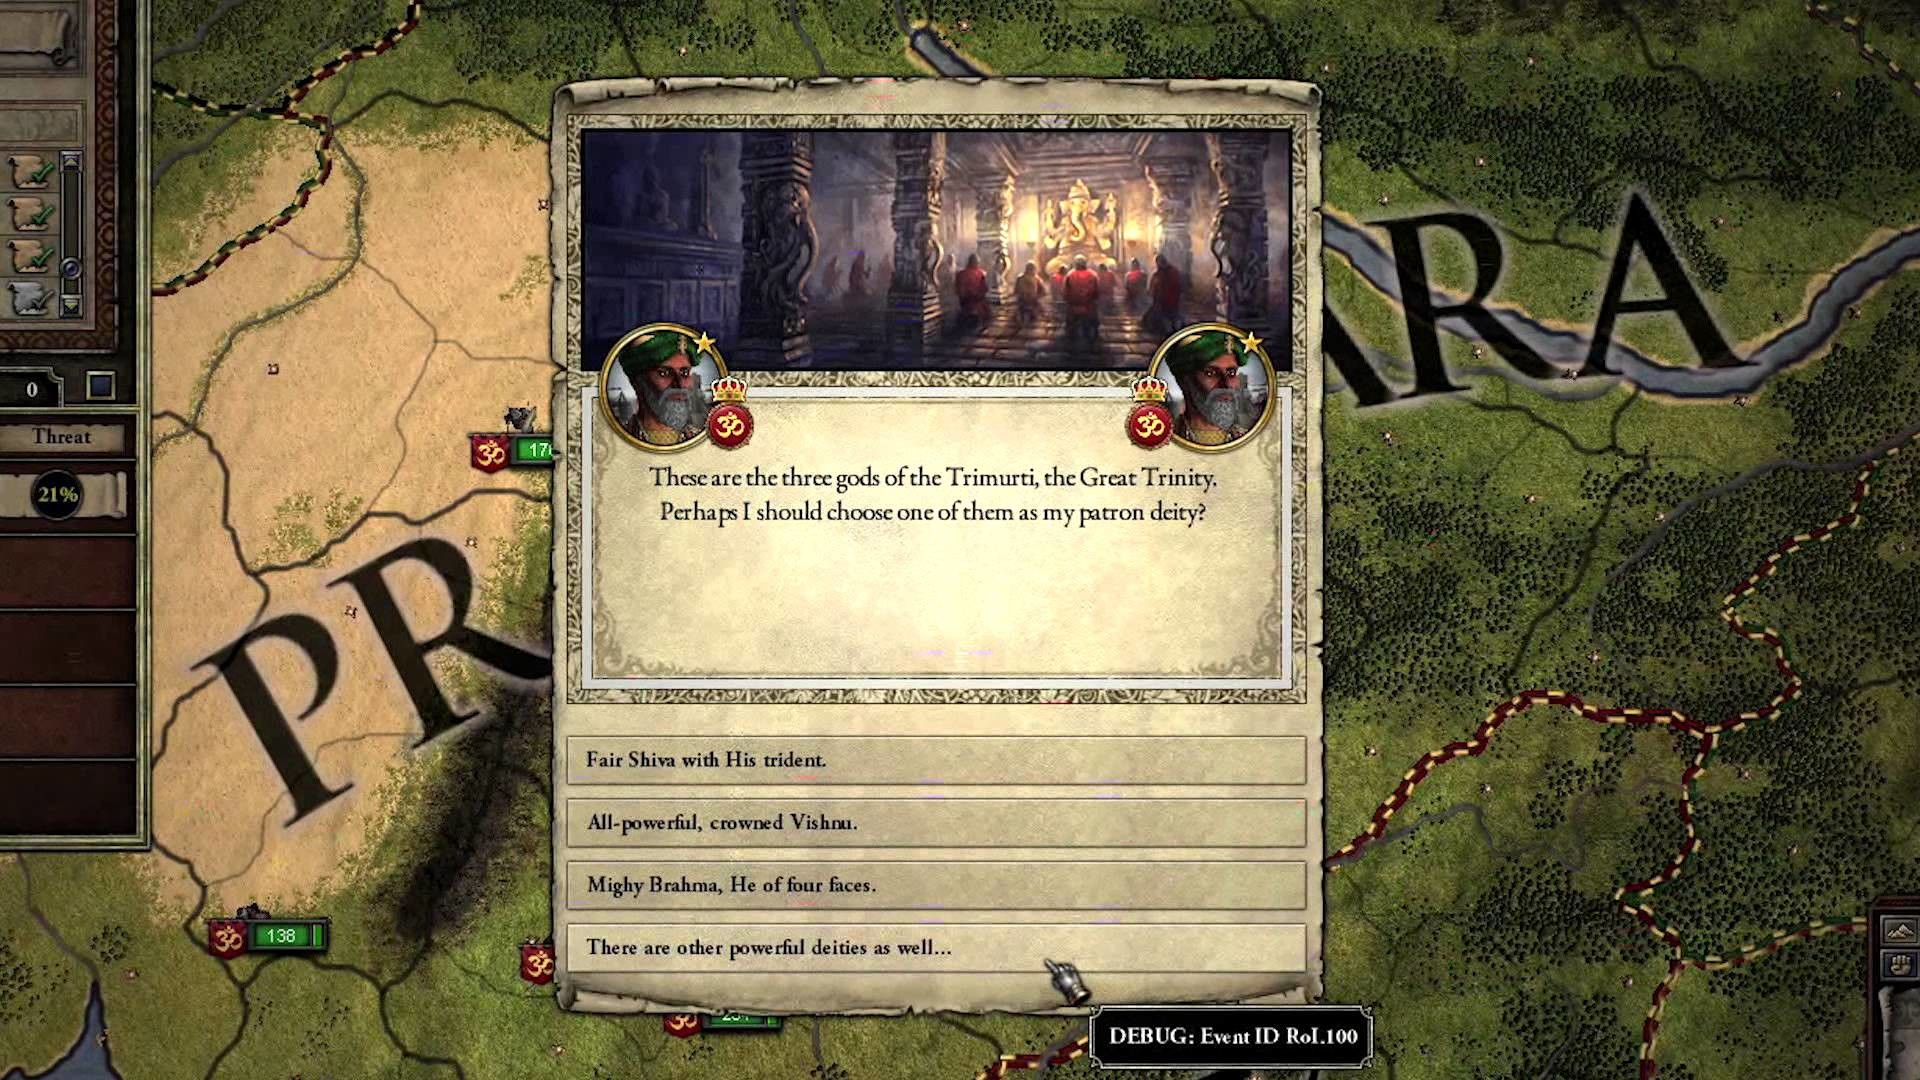 1920x1080 Crusader Kings 2: Rajas of India released with major patch | PC Invasion